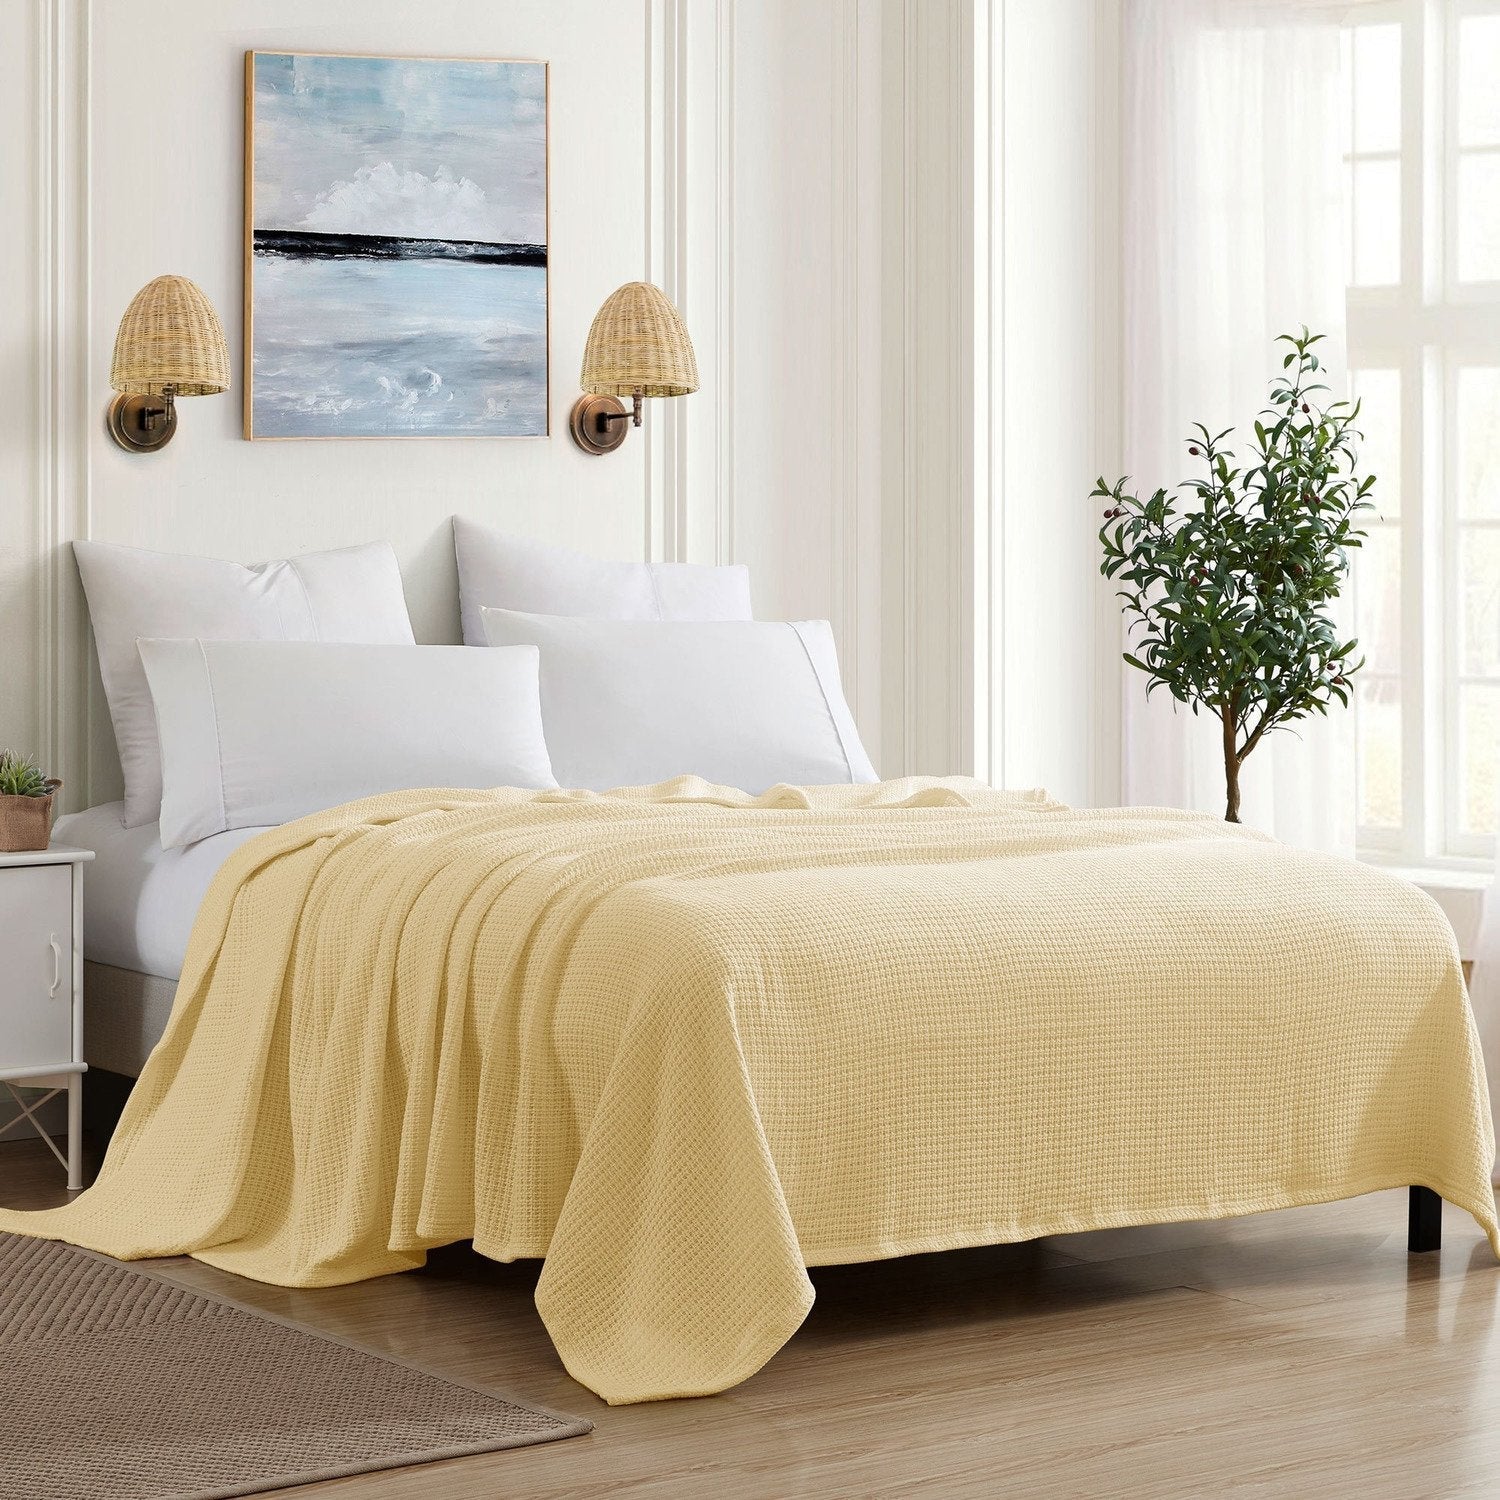 Basket Weave Cotton Blanket Yellow - Bed